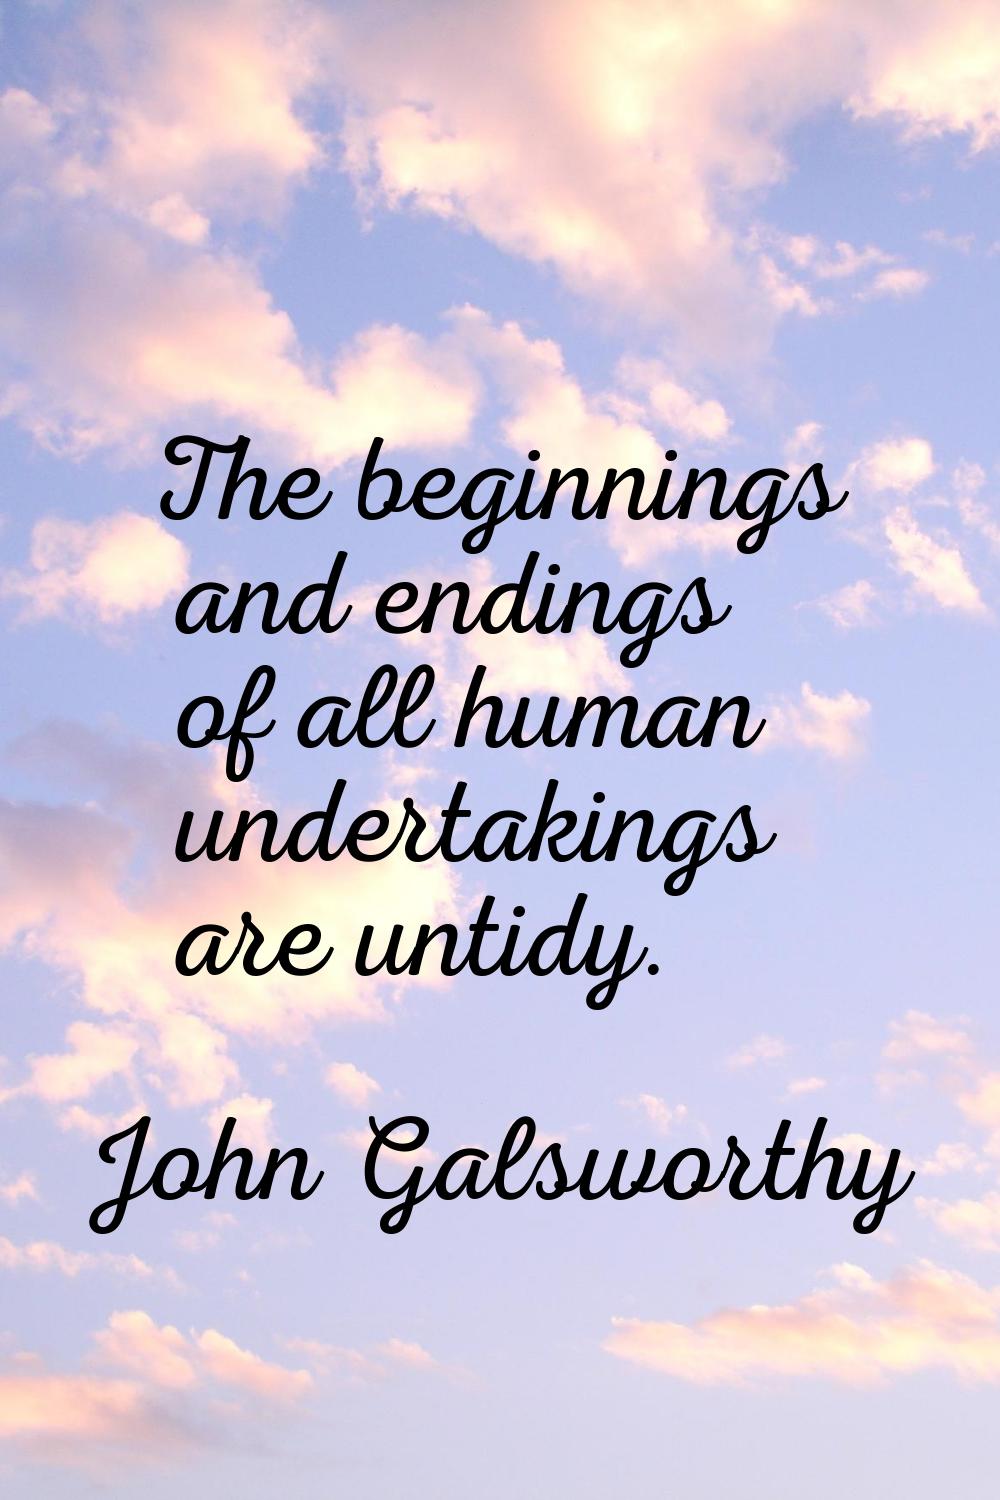 The beginnings and endings of all human undertakings are untidy.